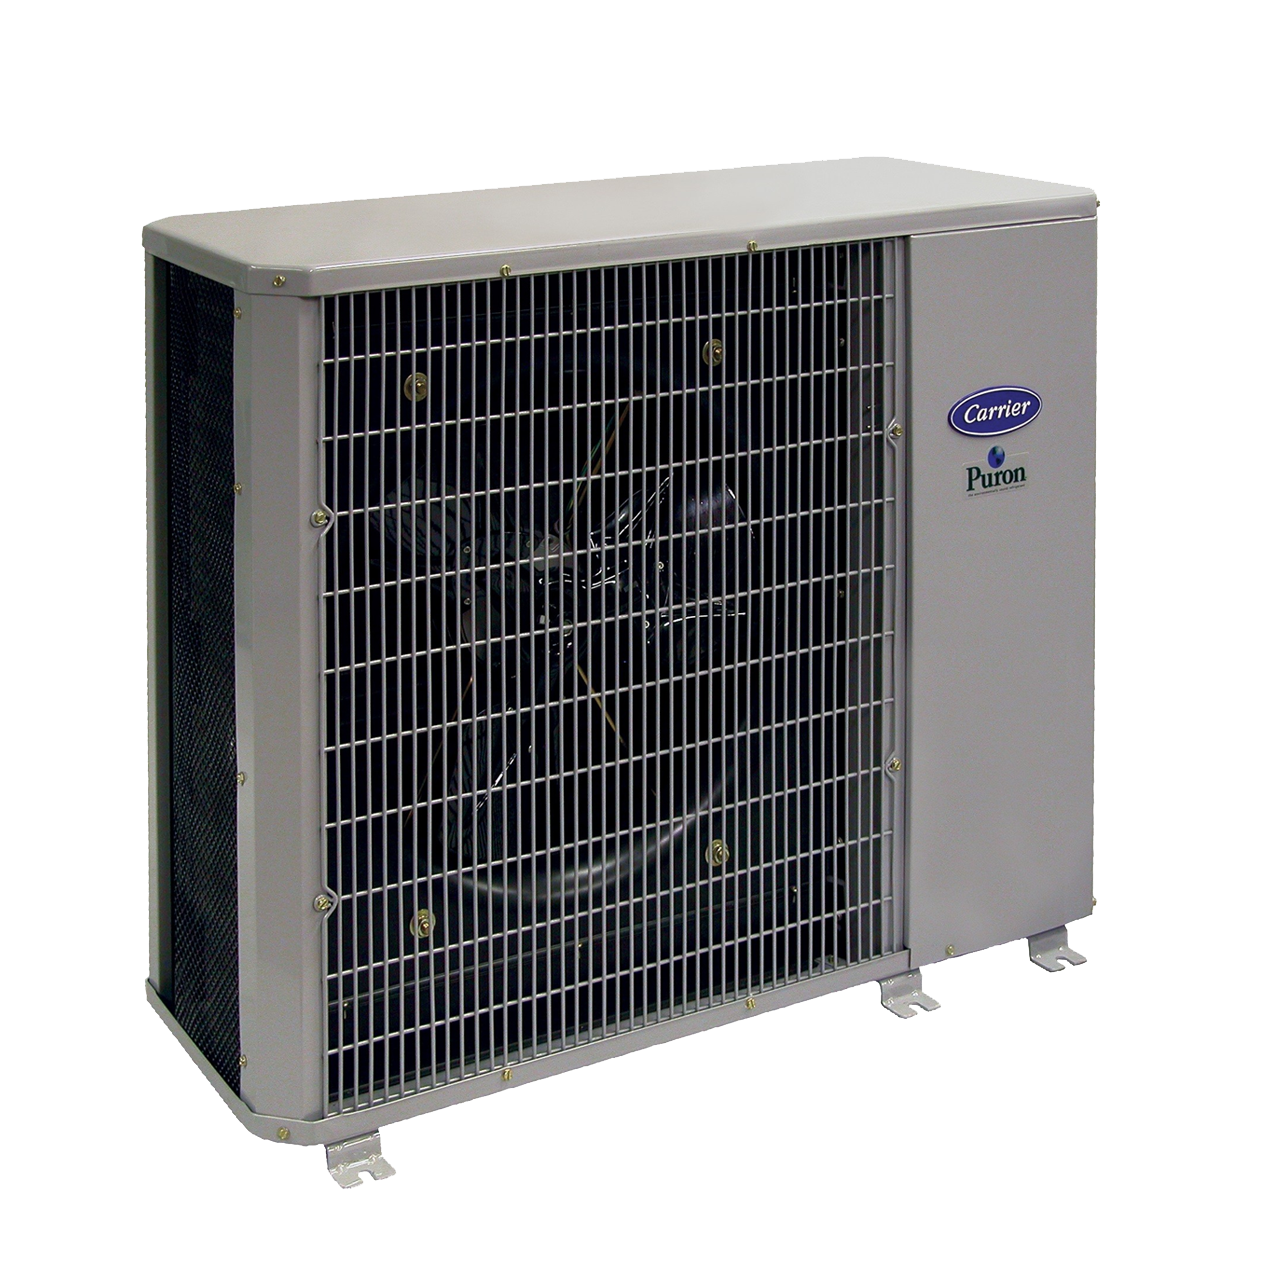 Performance 14 Compact Air Conditioner Unit 24aha4 Carrier Home